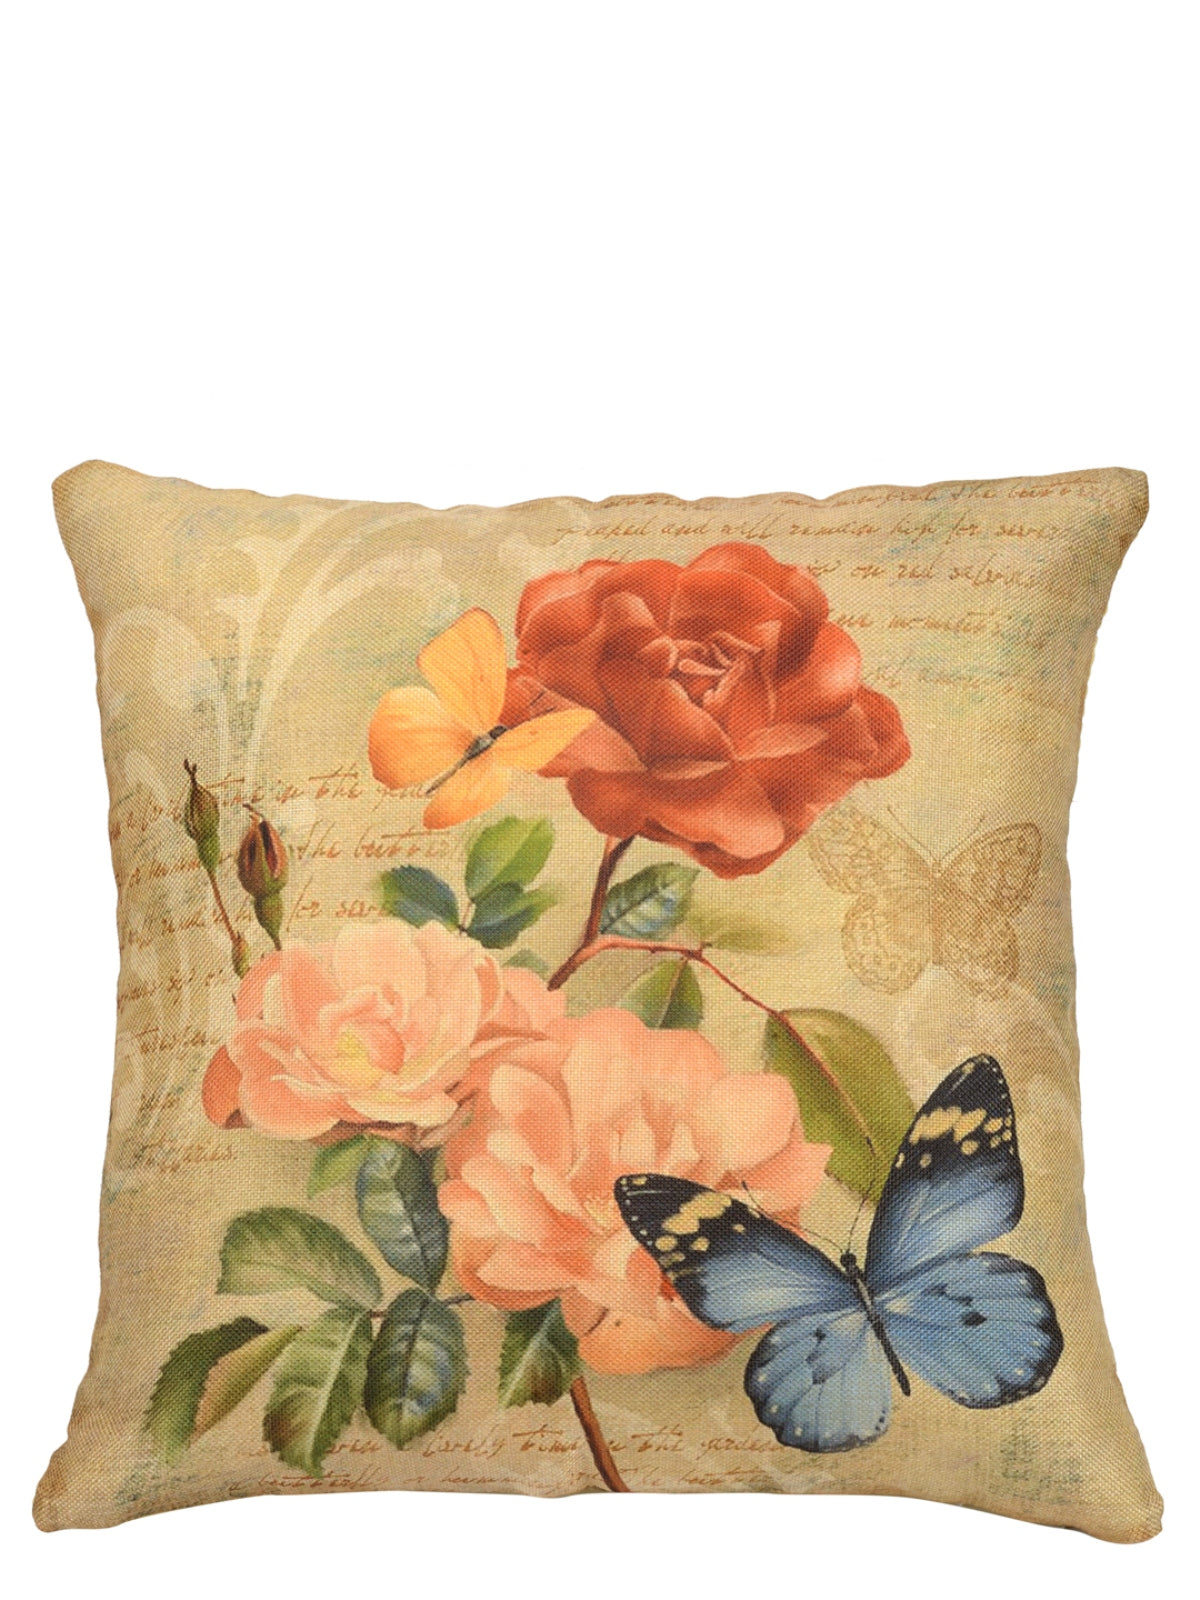 Soft Jute Painterly Floral Print Throw Pillow/Cushion Covers 16x16 inch Set of 5 - Multicolor